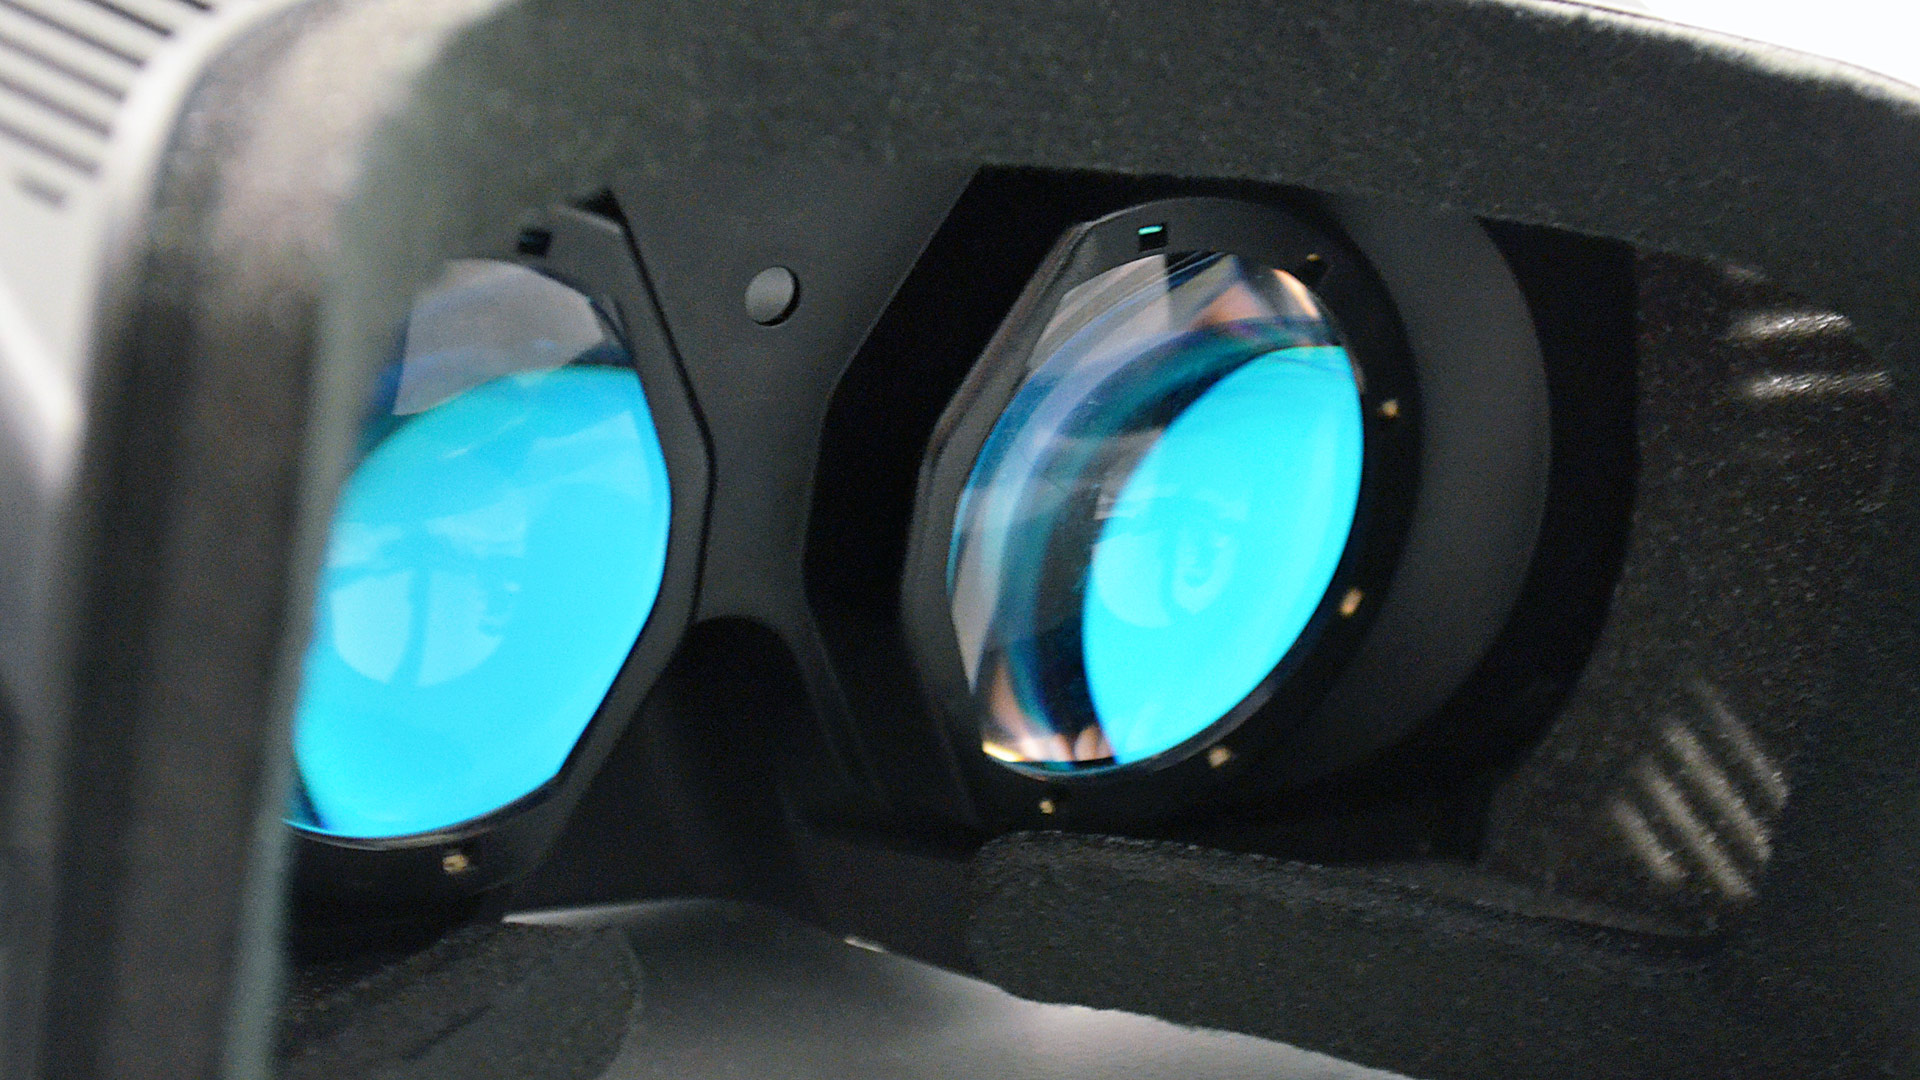 8 Reasons Why Eye-tracking is a Game Changer for VR